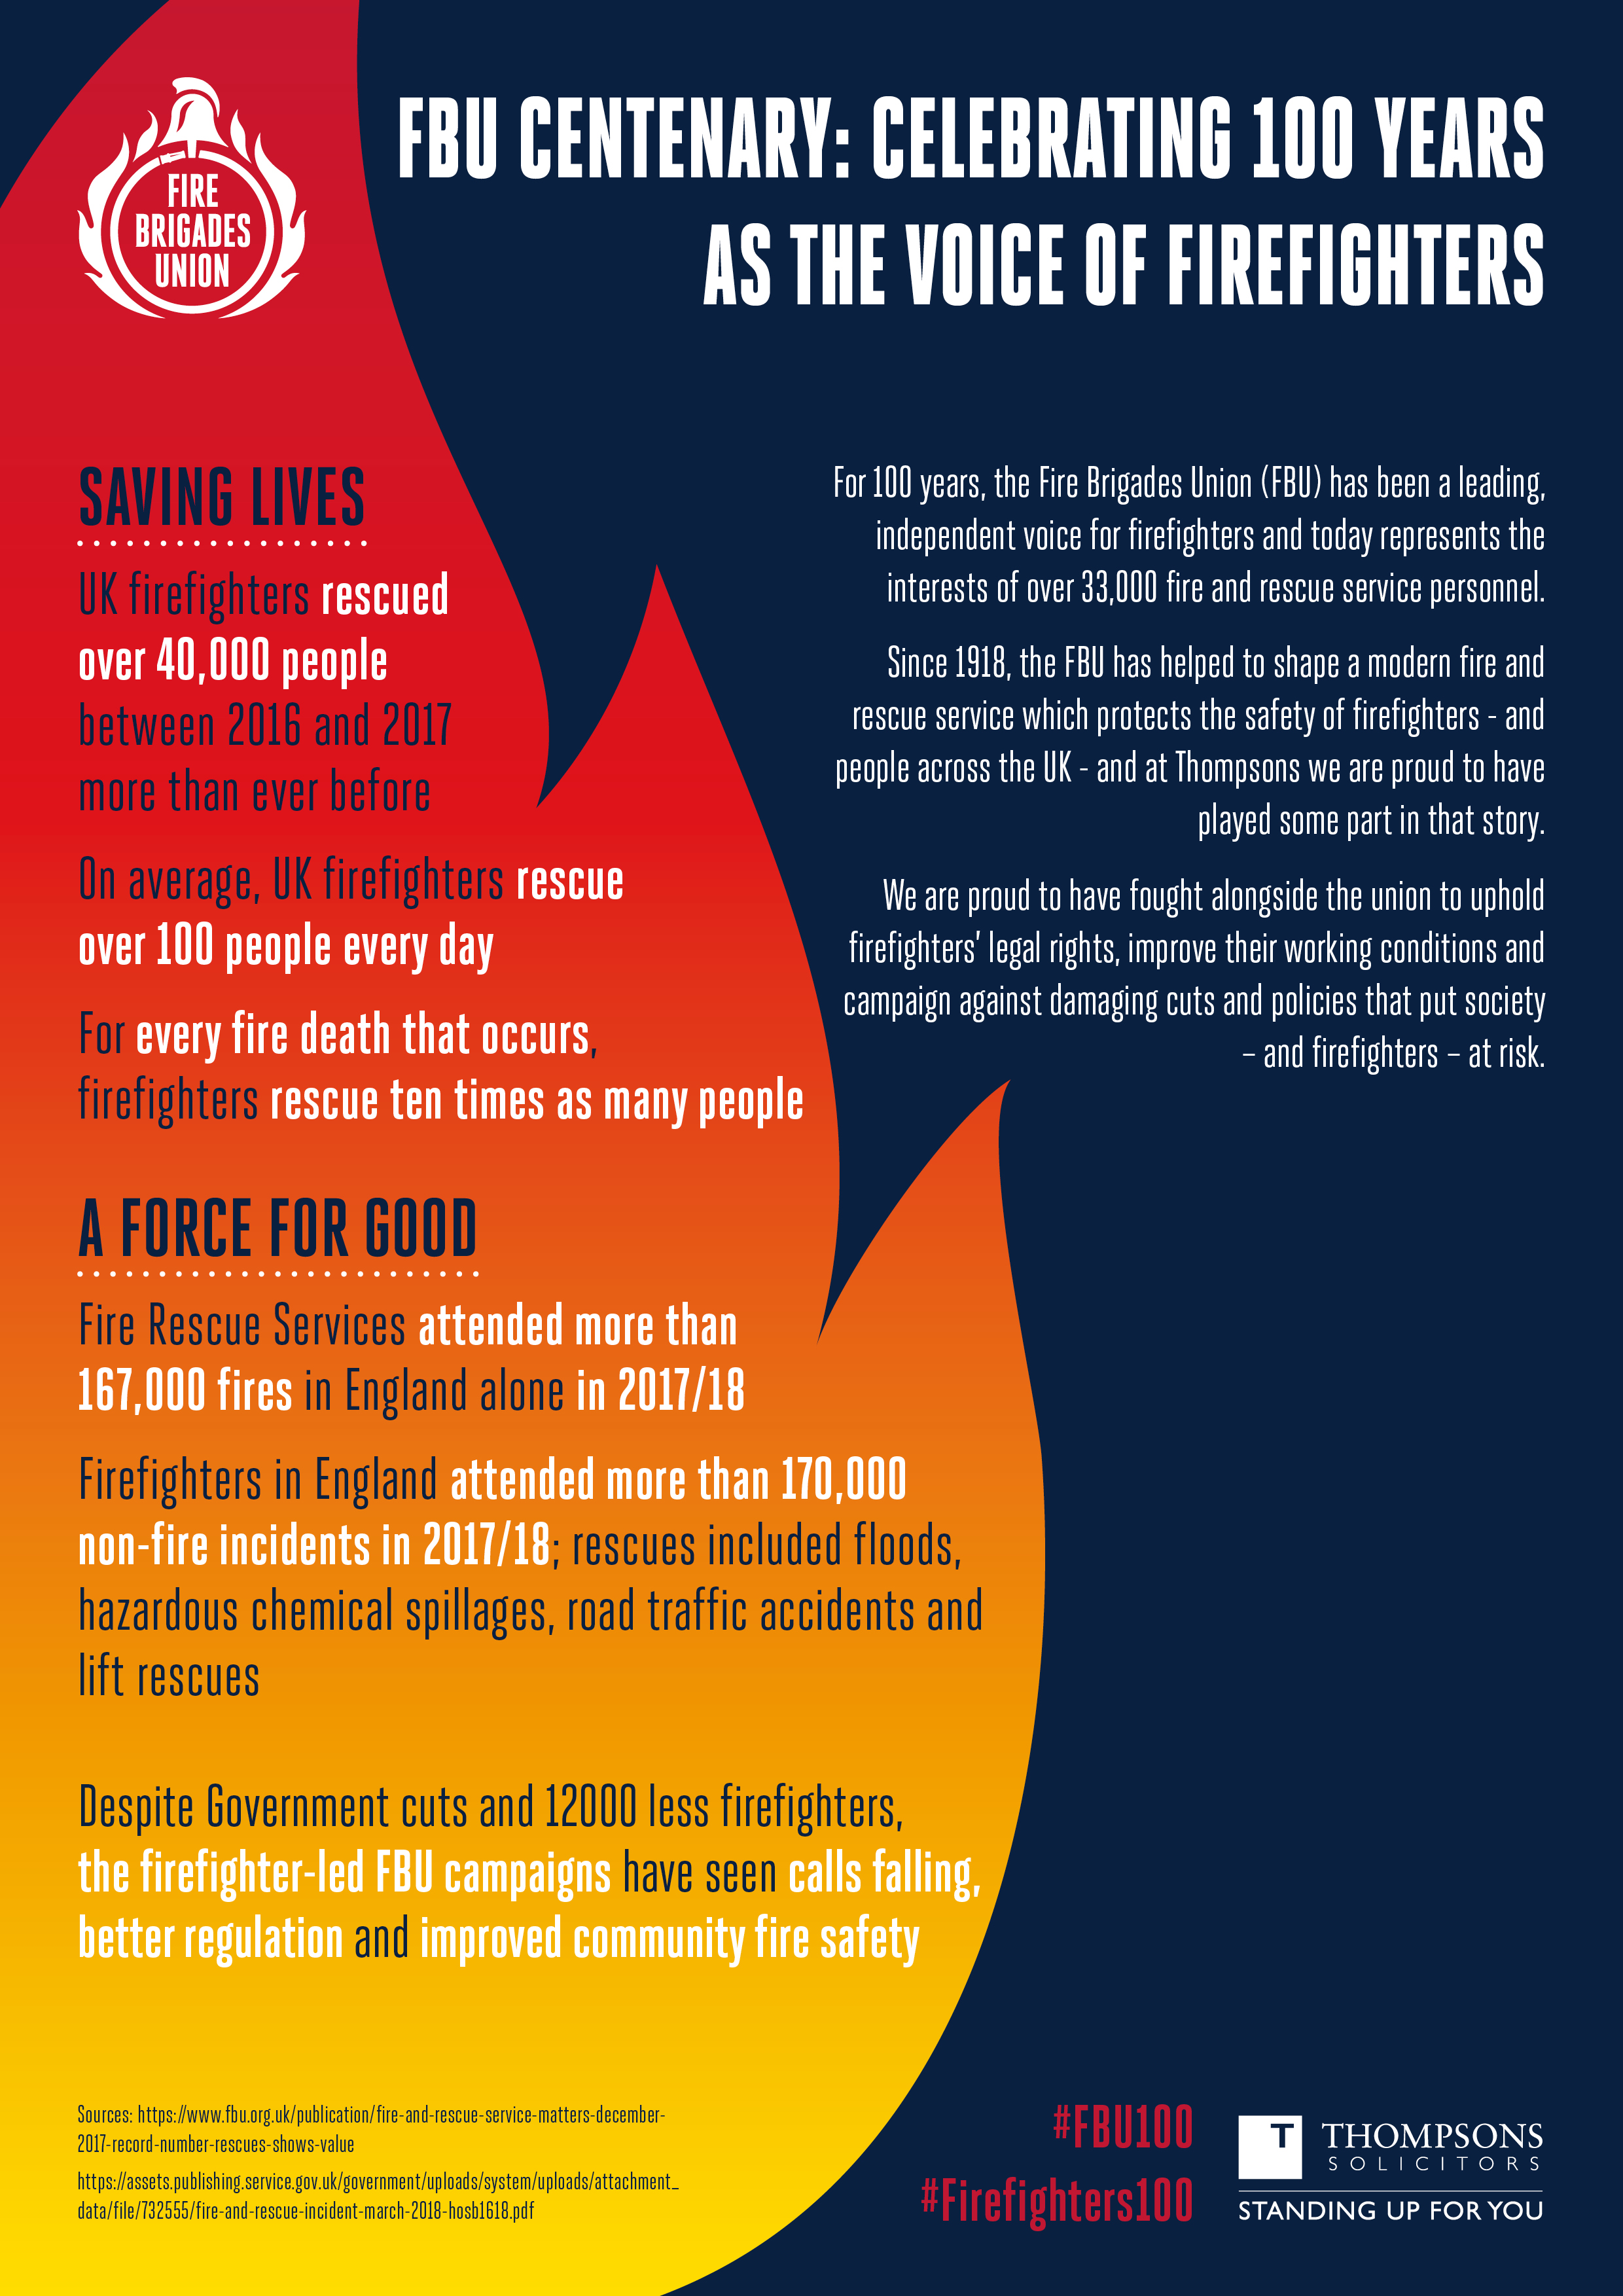 Statistics on the work done by Thompsons Solicitors with the Fire Brigades Union